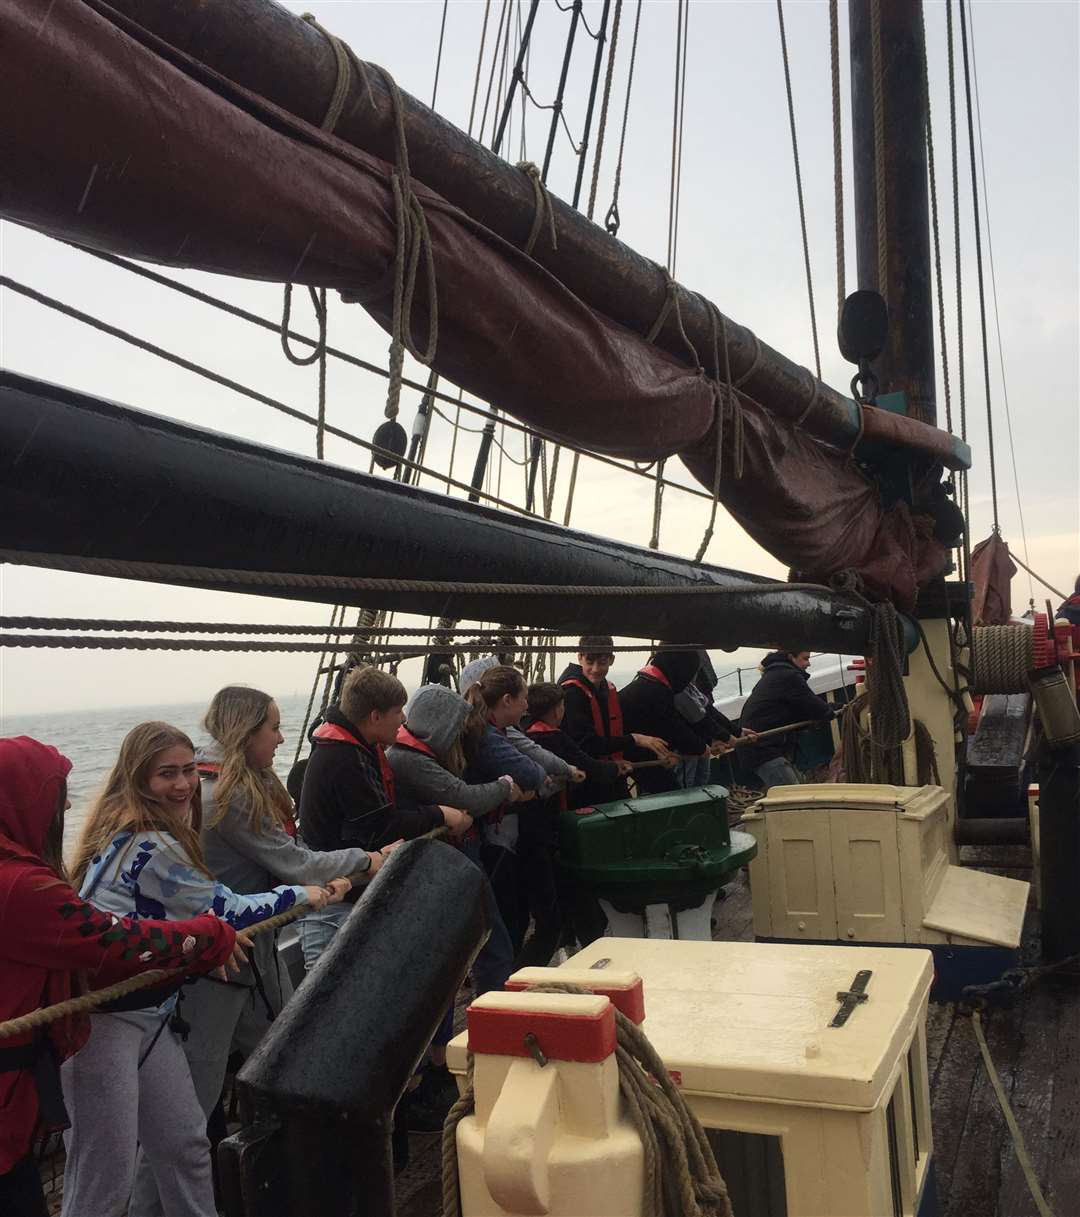 Crew duties included hauling all the ropes to set and trim the sails. Credit: Barking Dog Media.